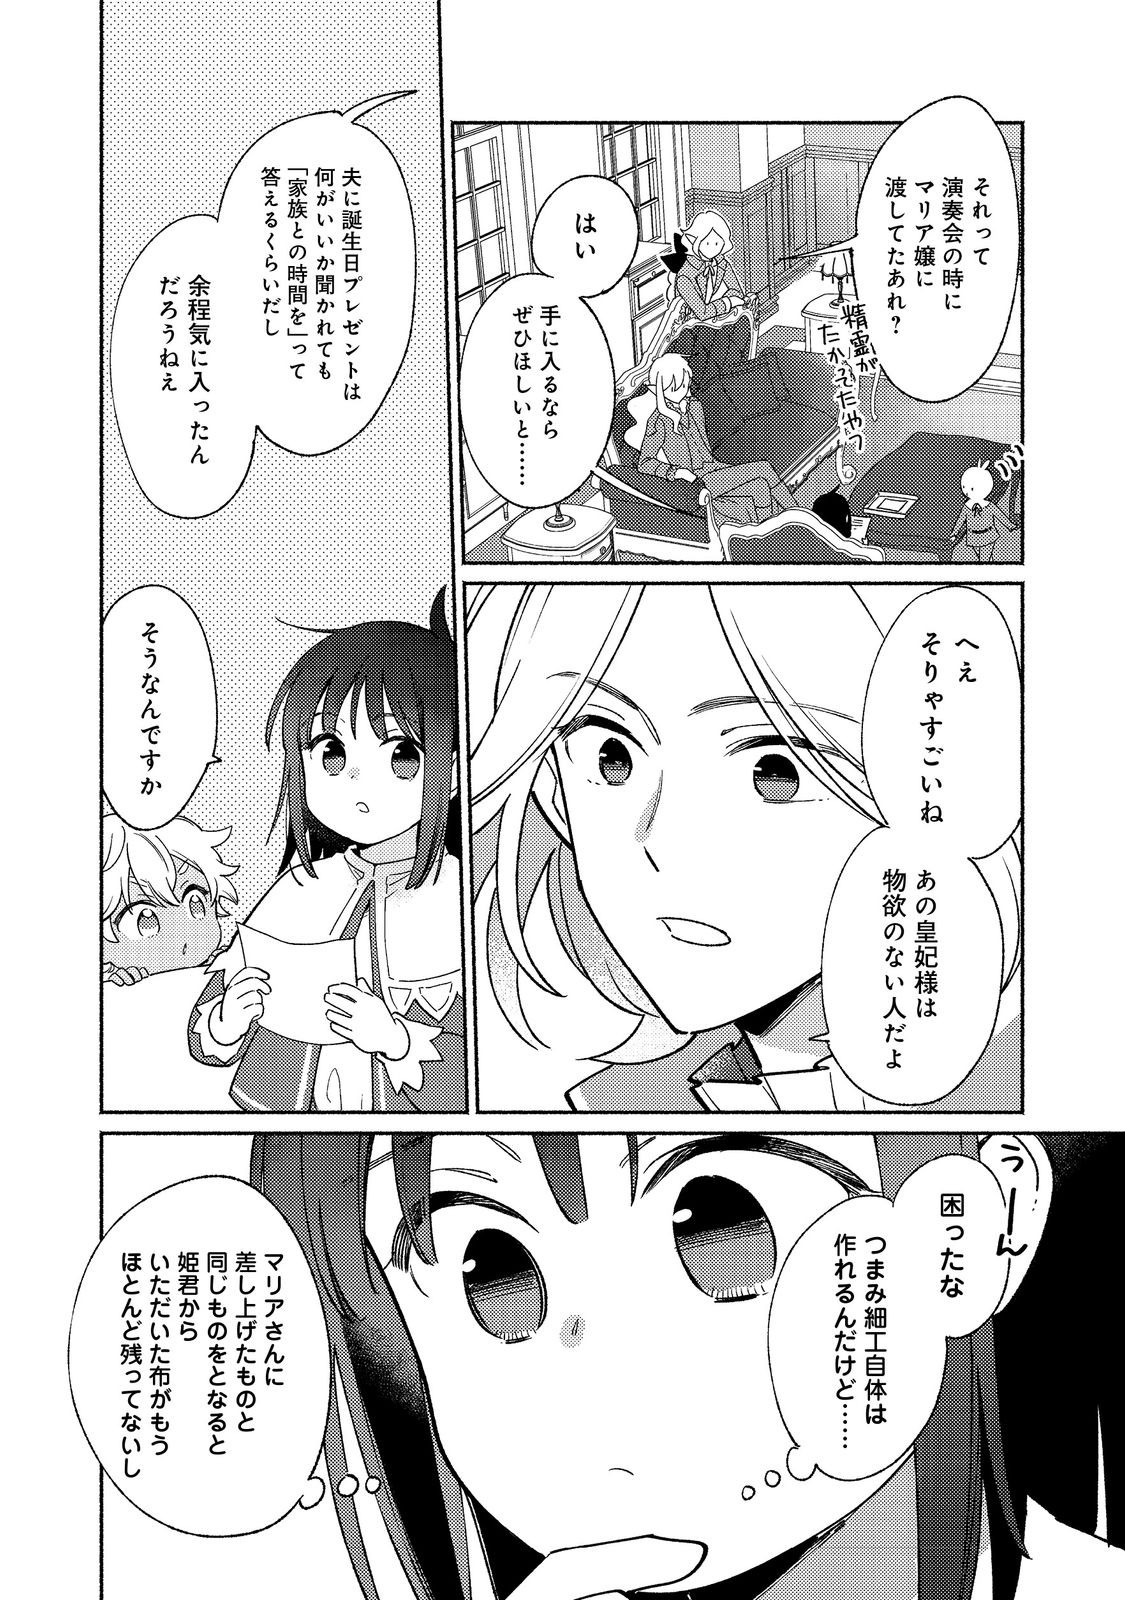 I’m the White Pig Nobleman 第19.1話 - Page 8